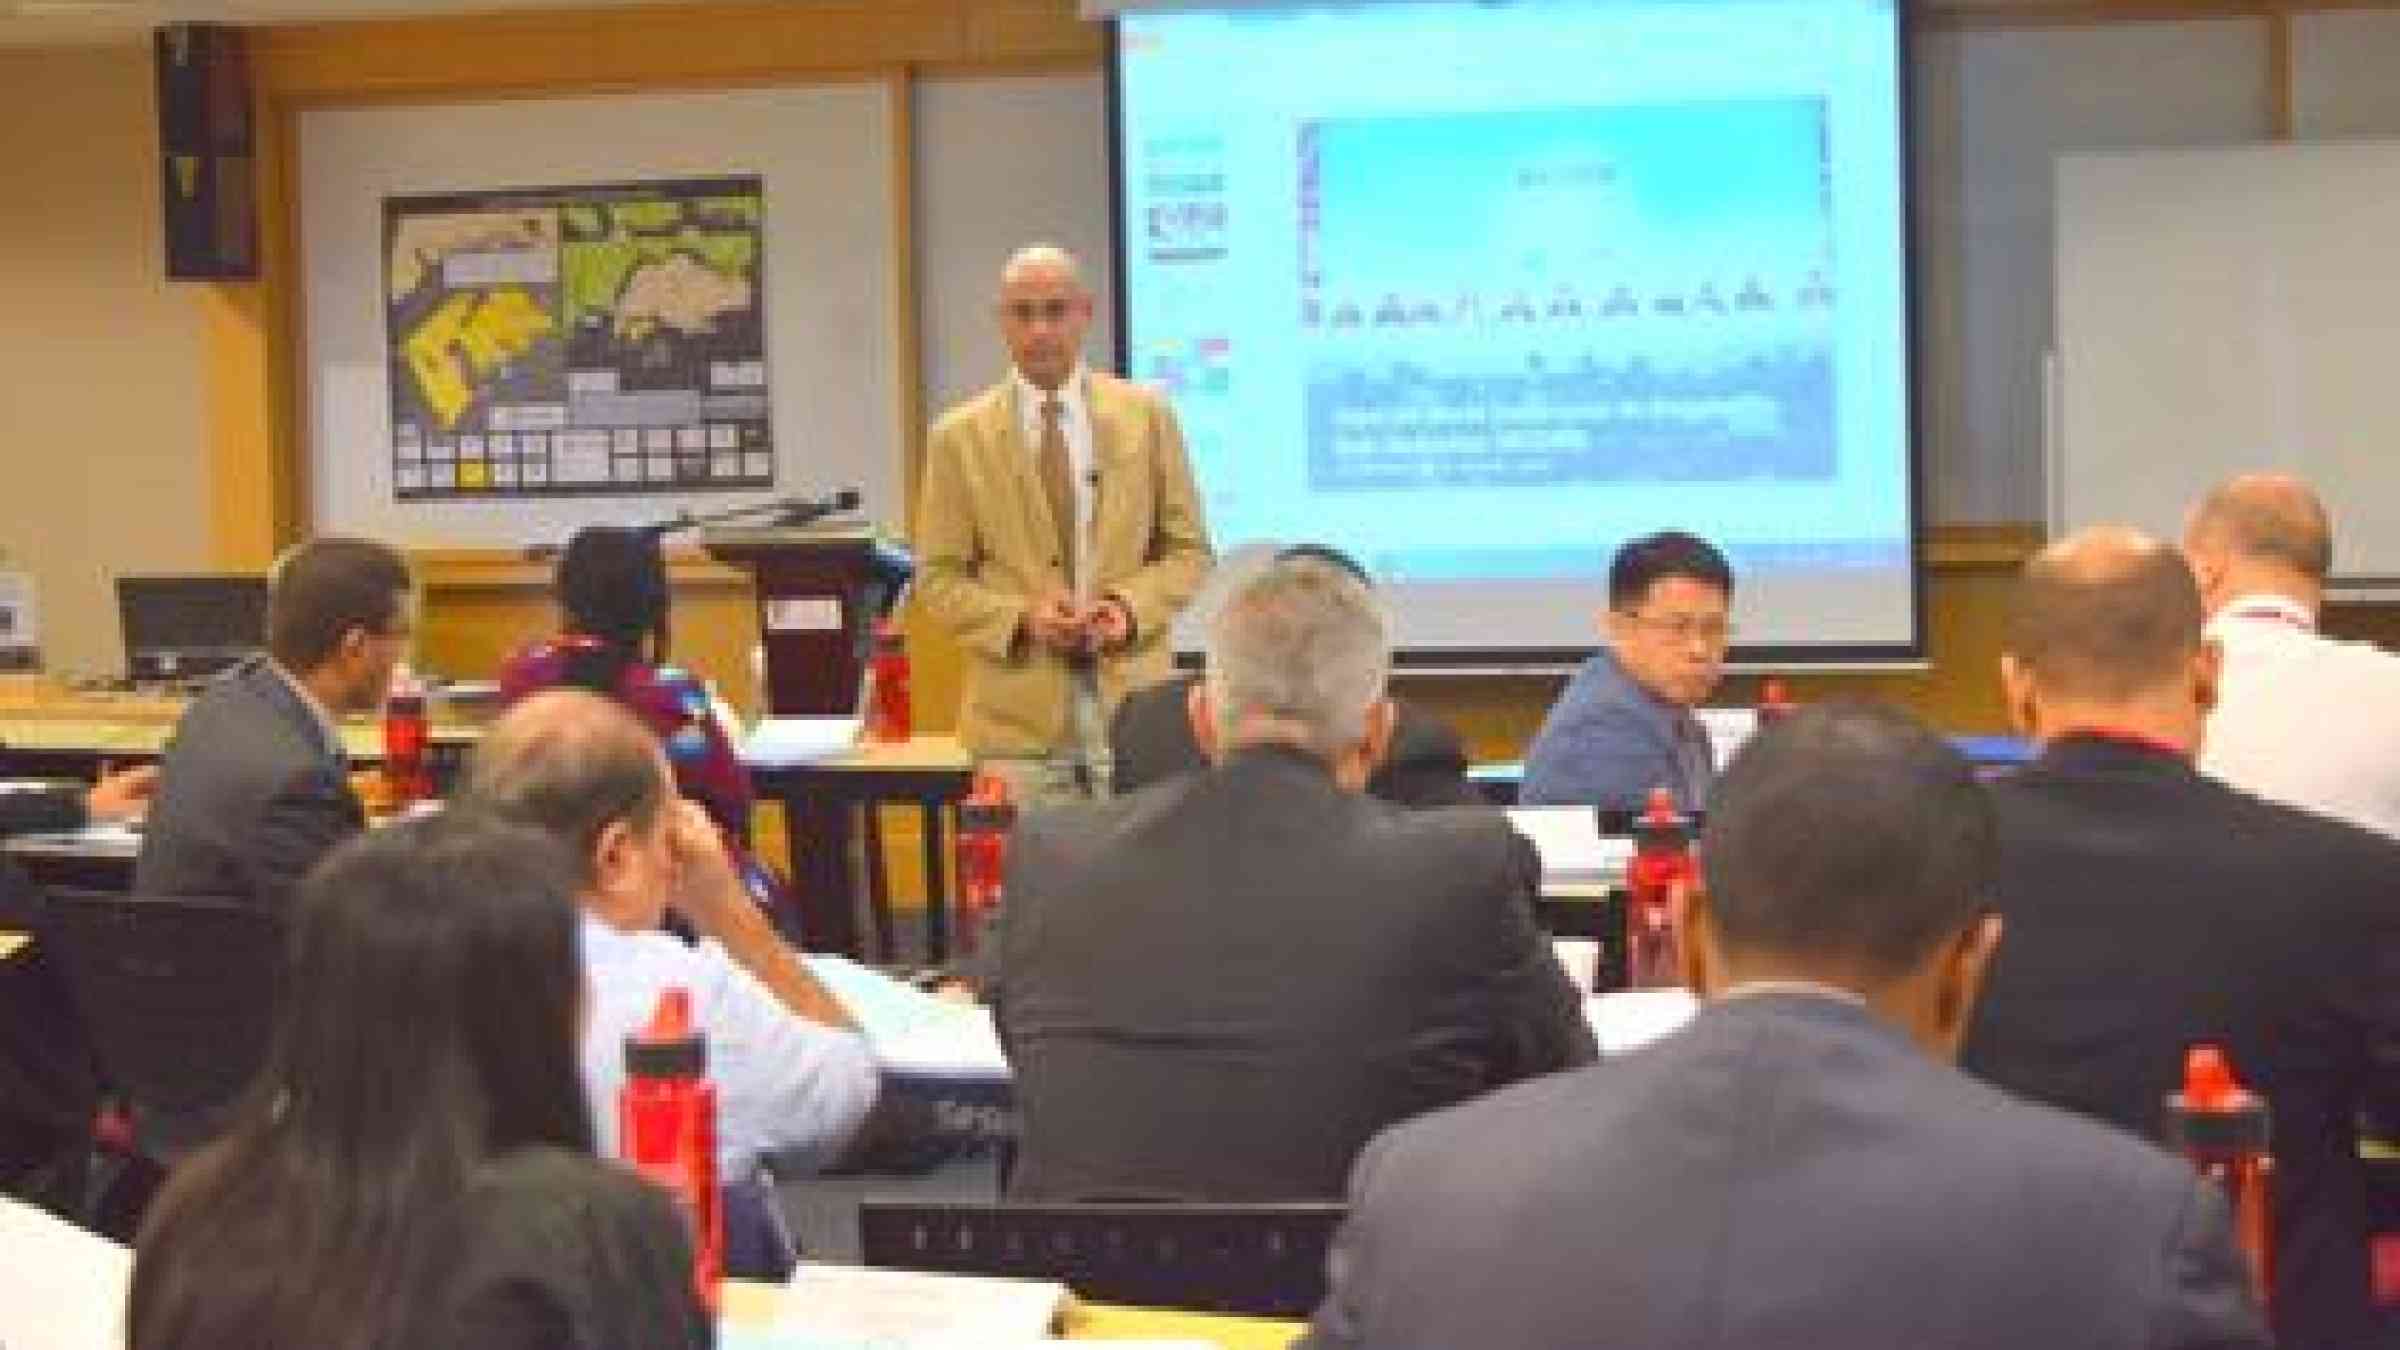 Mr Sanjaya Bhatia, Head, UNISDR Office for Northeast Asia and Global Education and Training Institute (GETI), speaking to participants about the Sendai Framework for Disaster Risk Reduction. (Photo: UNISDR)